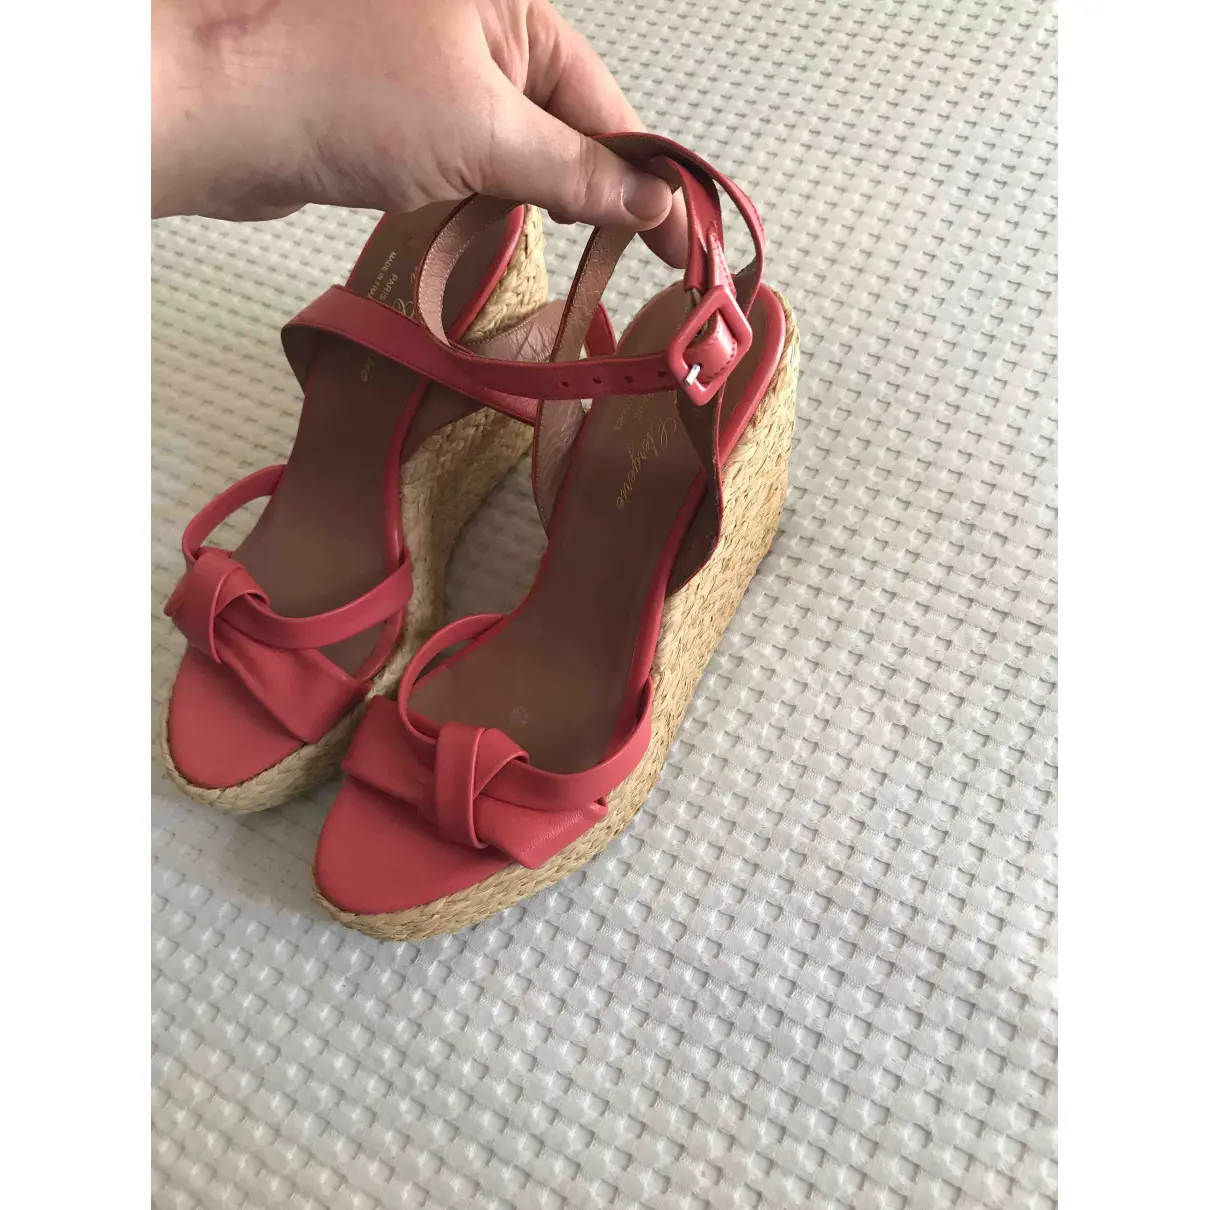 Buy Robert Clergerie Leather sandals online